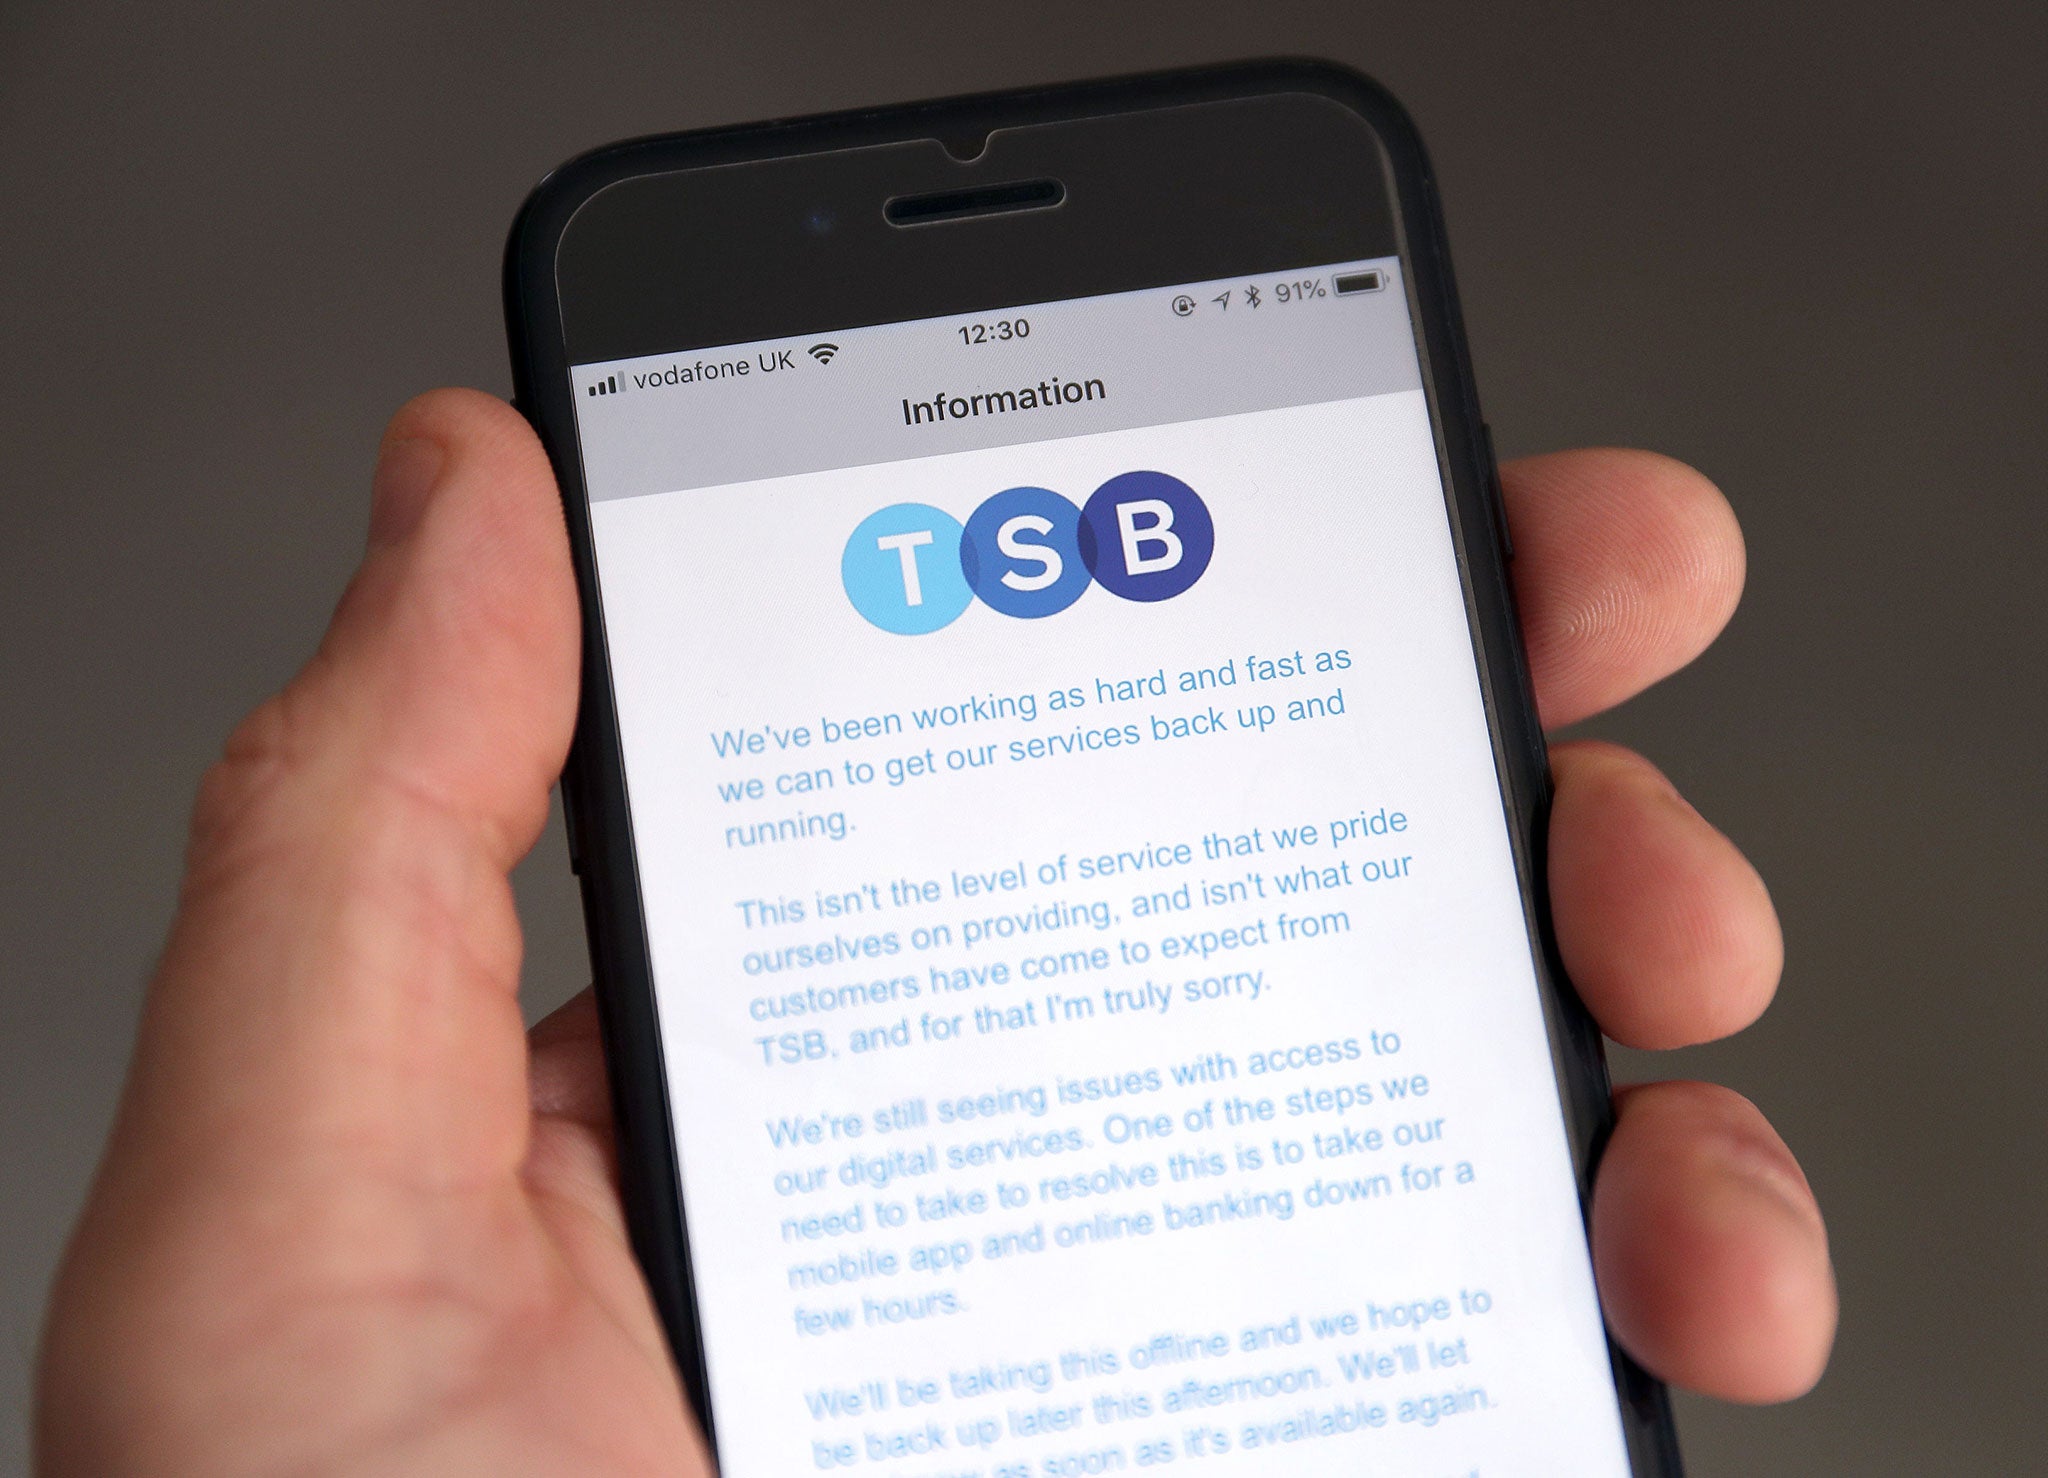 TSB’s IT meltdown left millions of customers unable to access online or mobile banking,